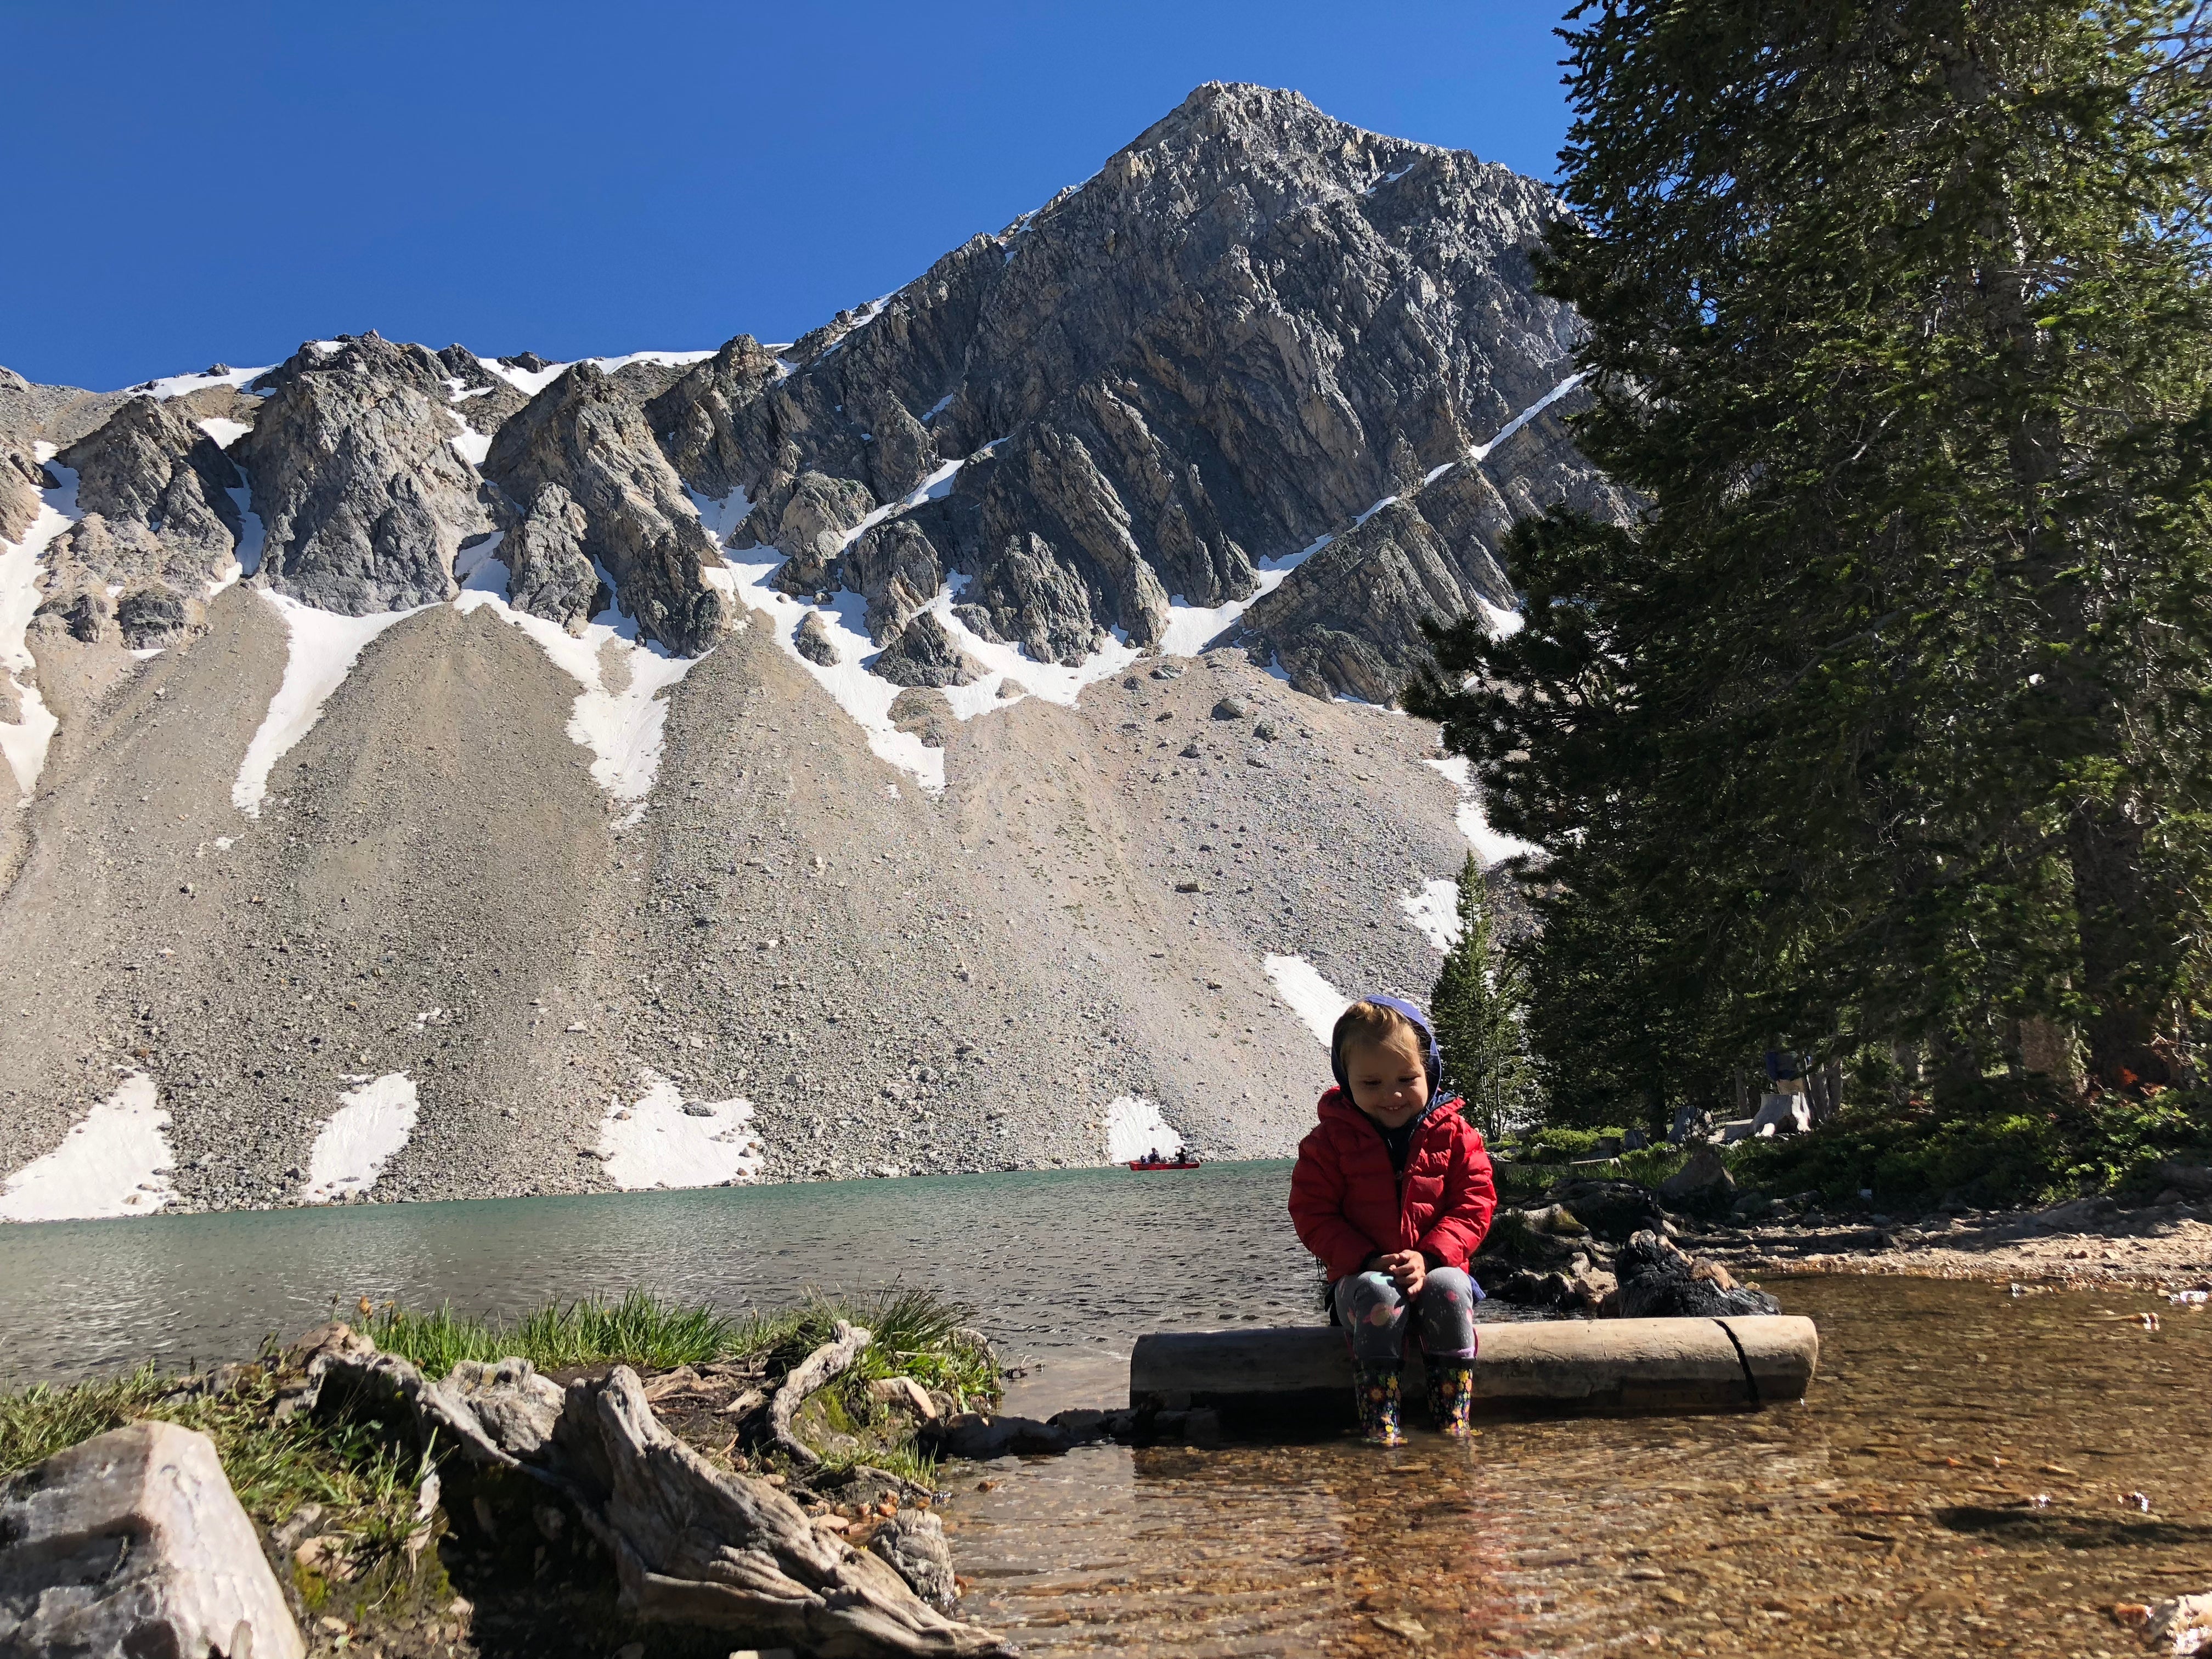 View from the campsite looking up to Meadow Lake Peak